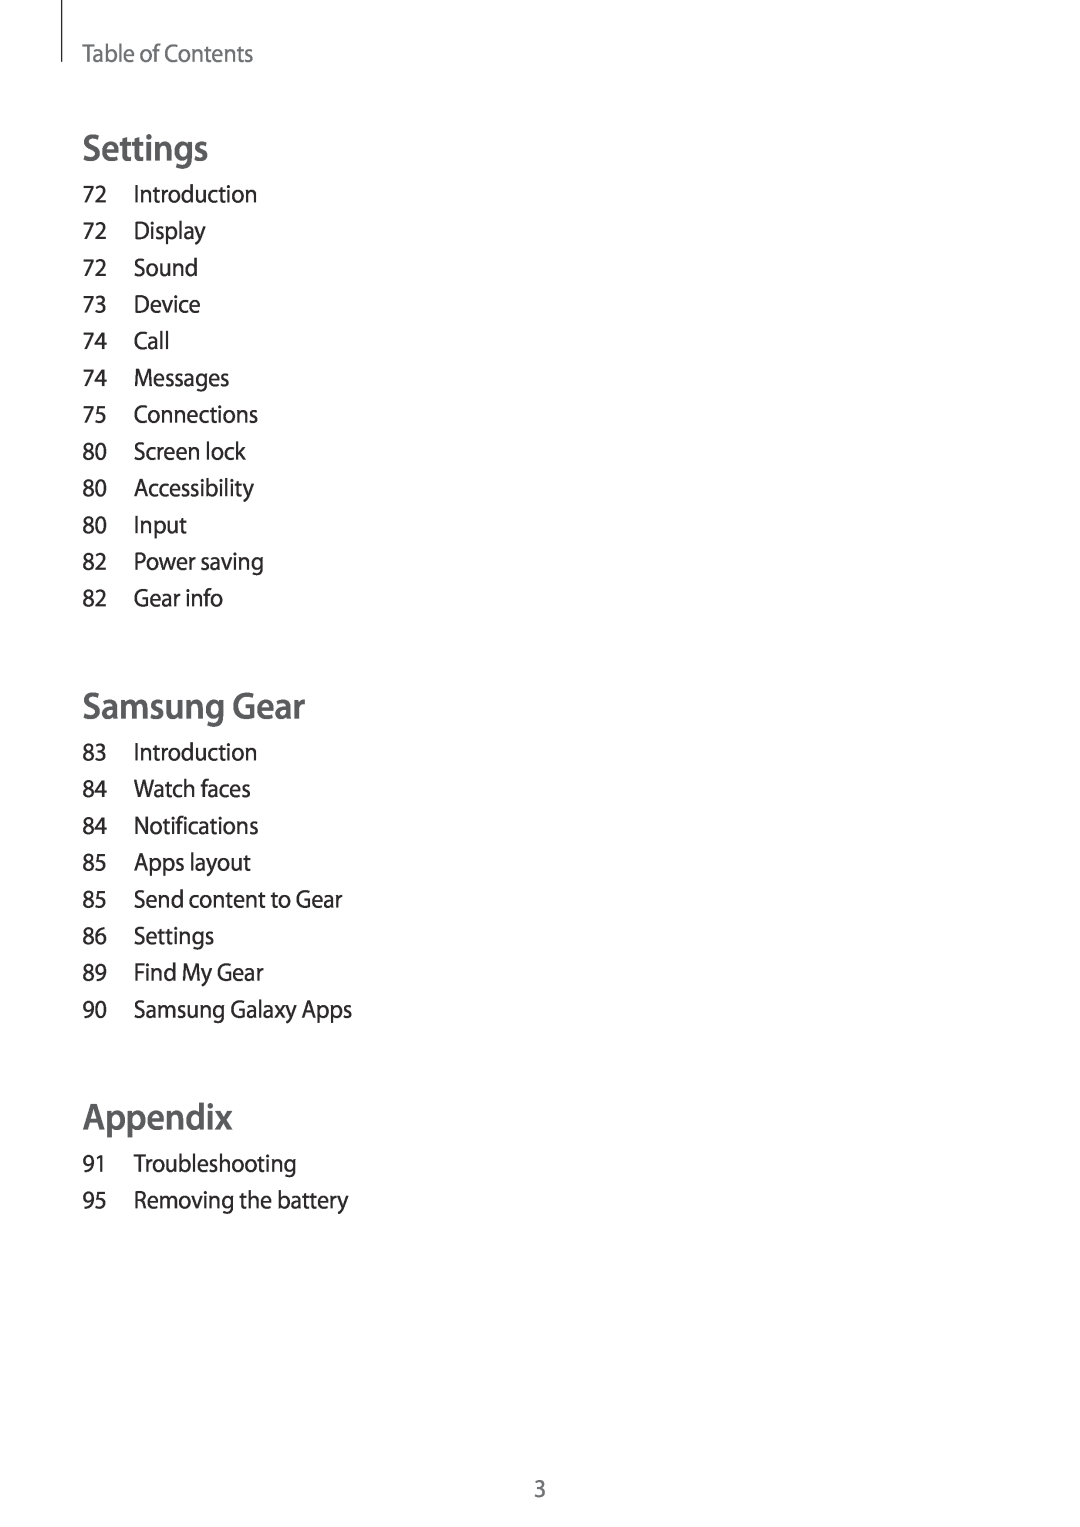 Samsung SM-R7350ZKGFTM Settings, Samsung Gear, Appendix, Table of Contents, Power saving 82 Gear info, Samsung Galaxy Apps 